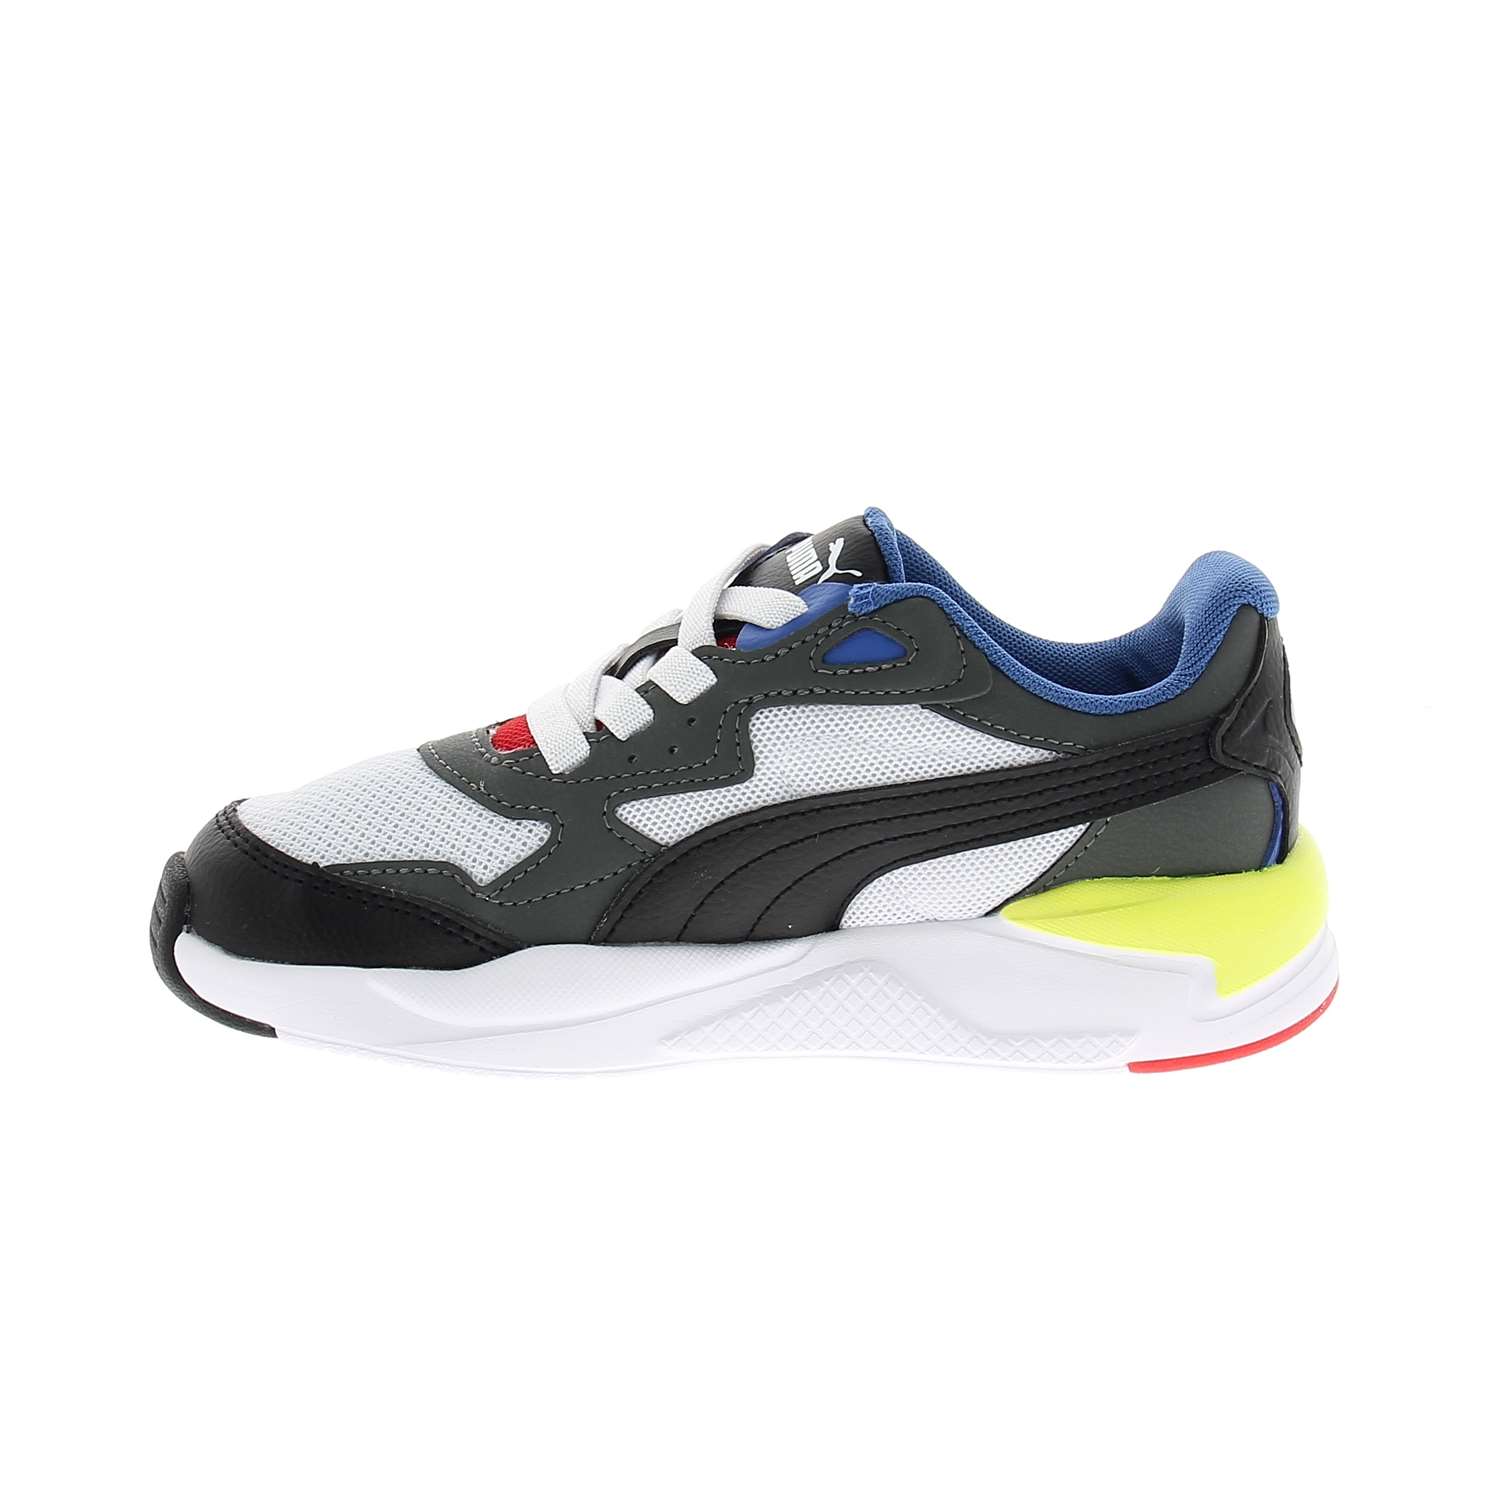 05 - X RAY SPEED - PUMA - Baskets - Synthétique